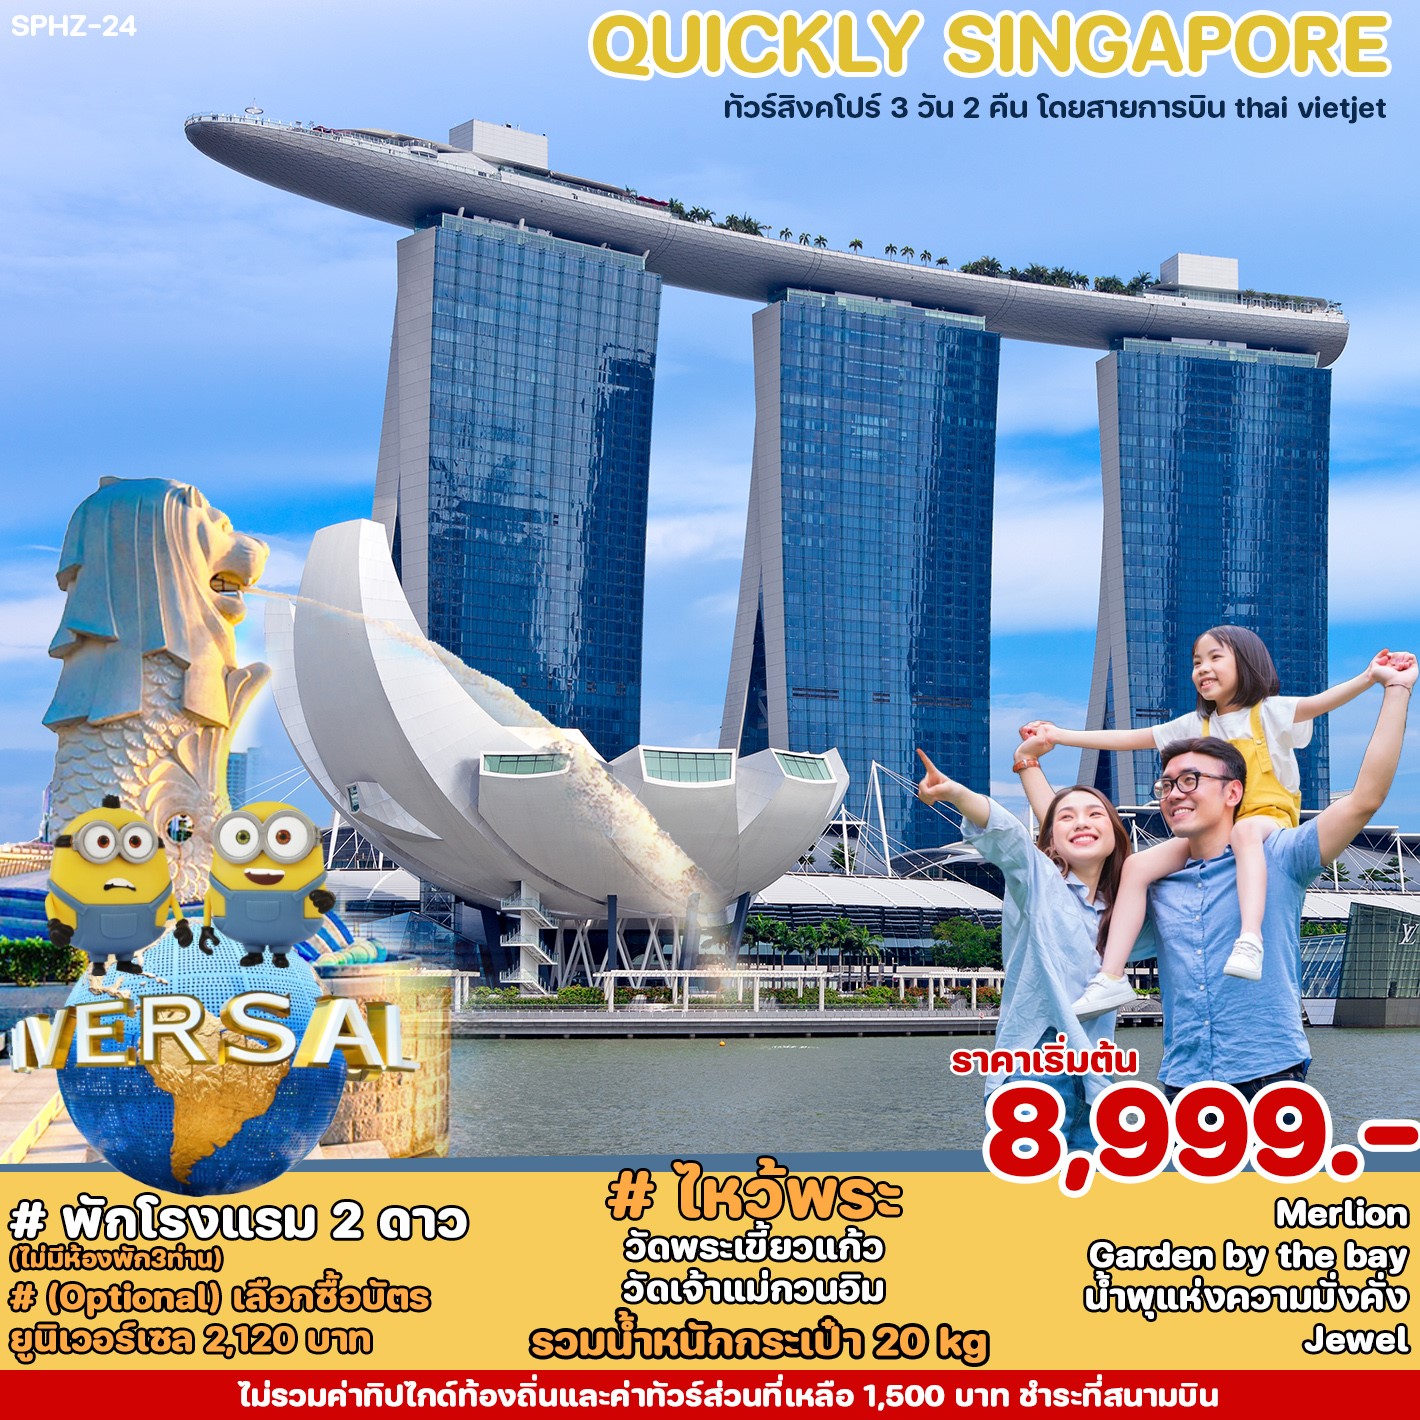 QUICKLY SINGAPORE 3D2N by VZ